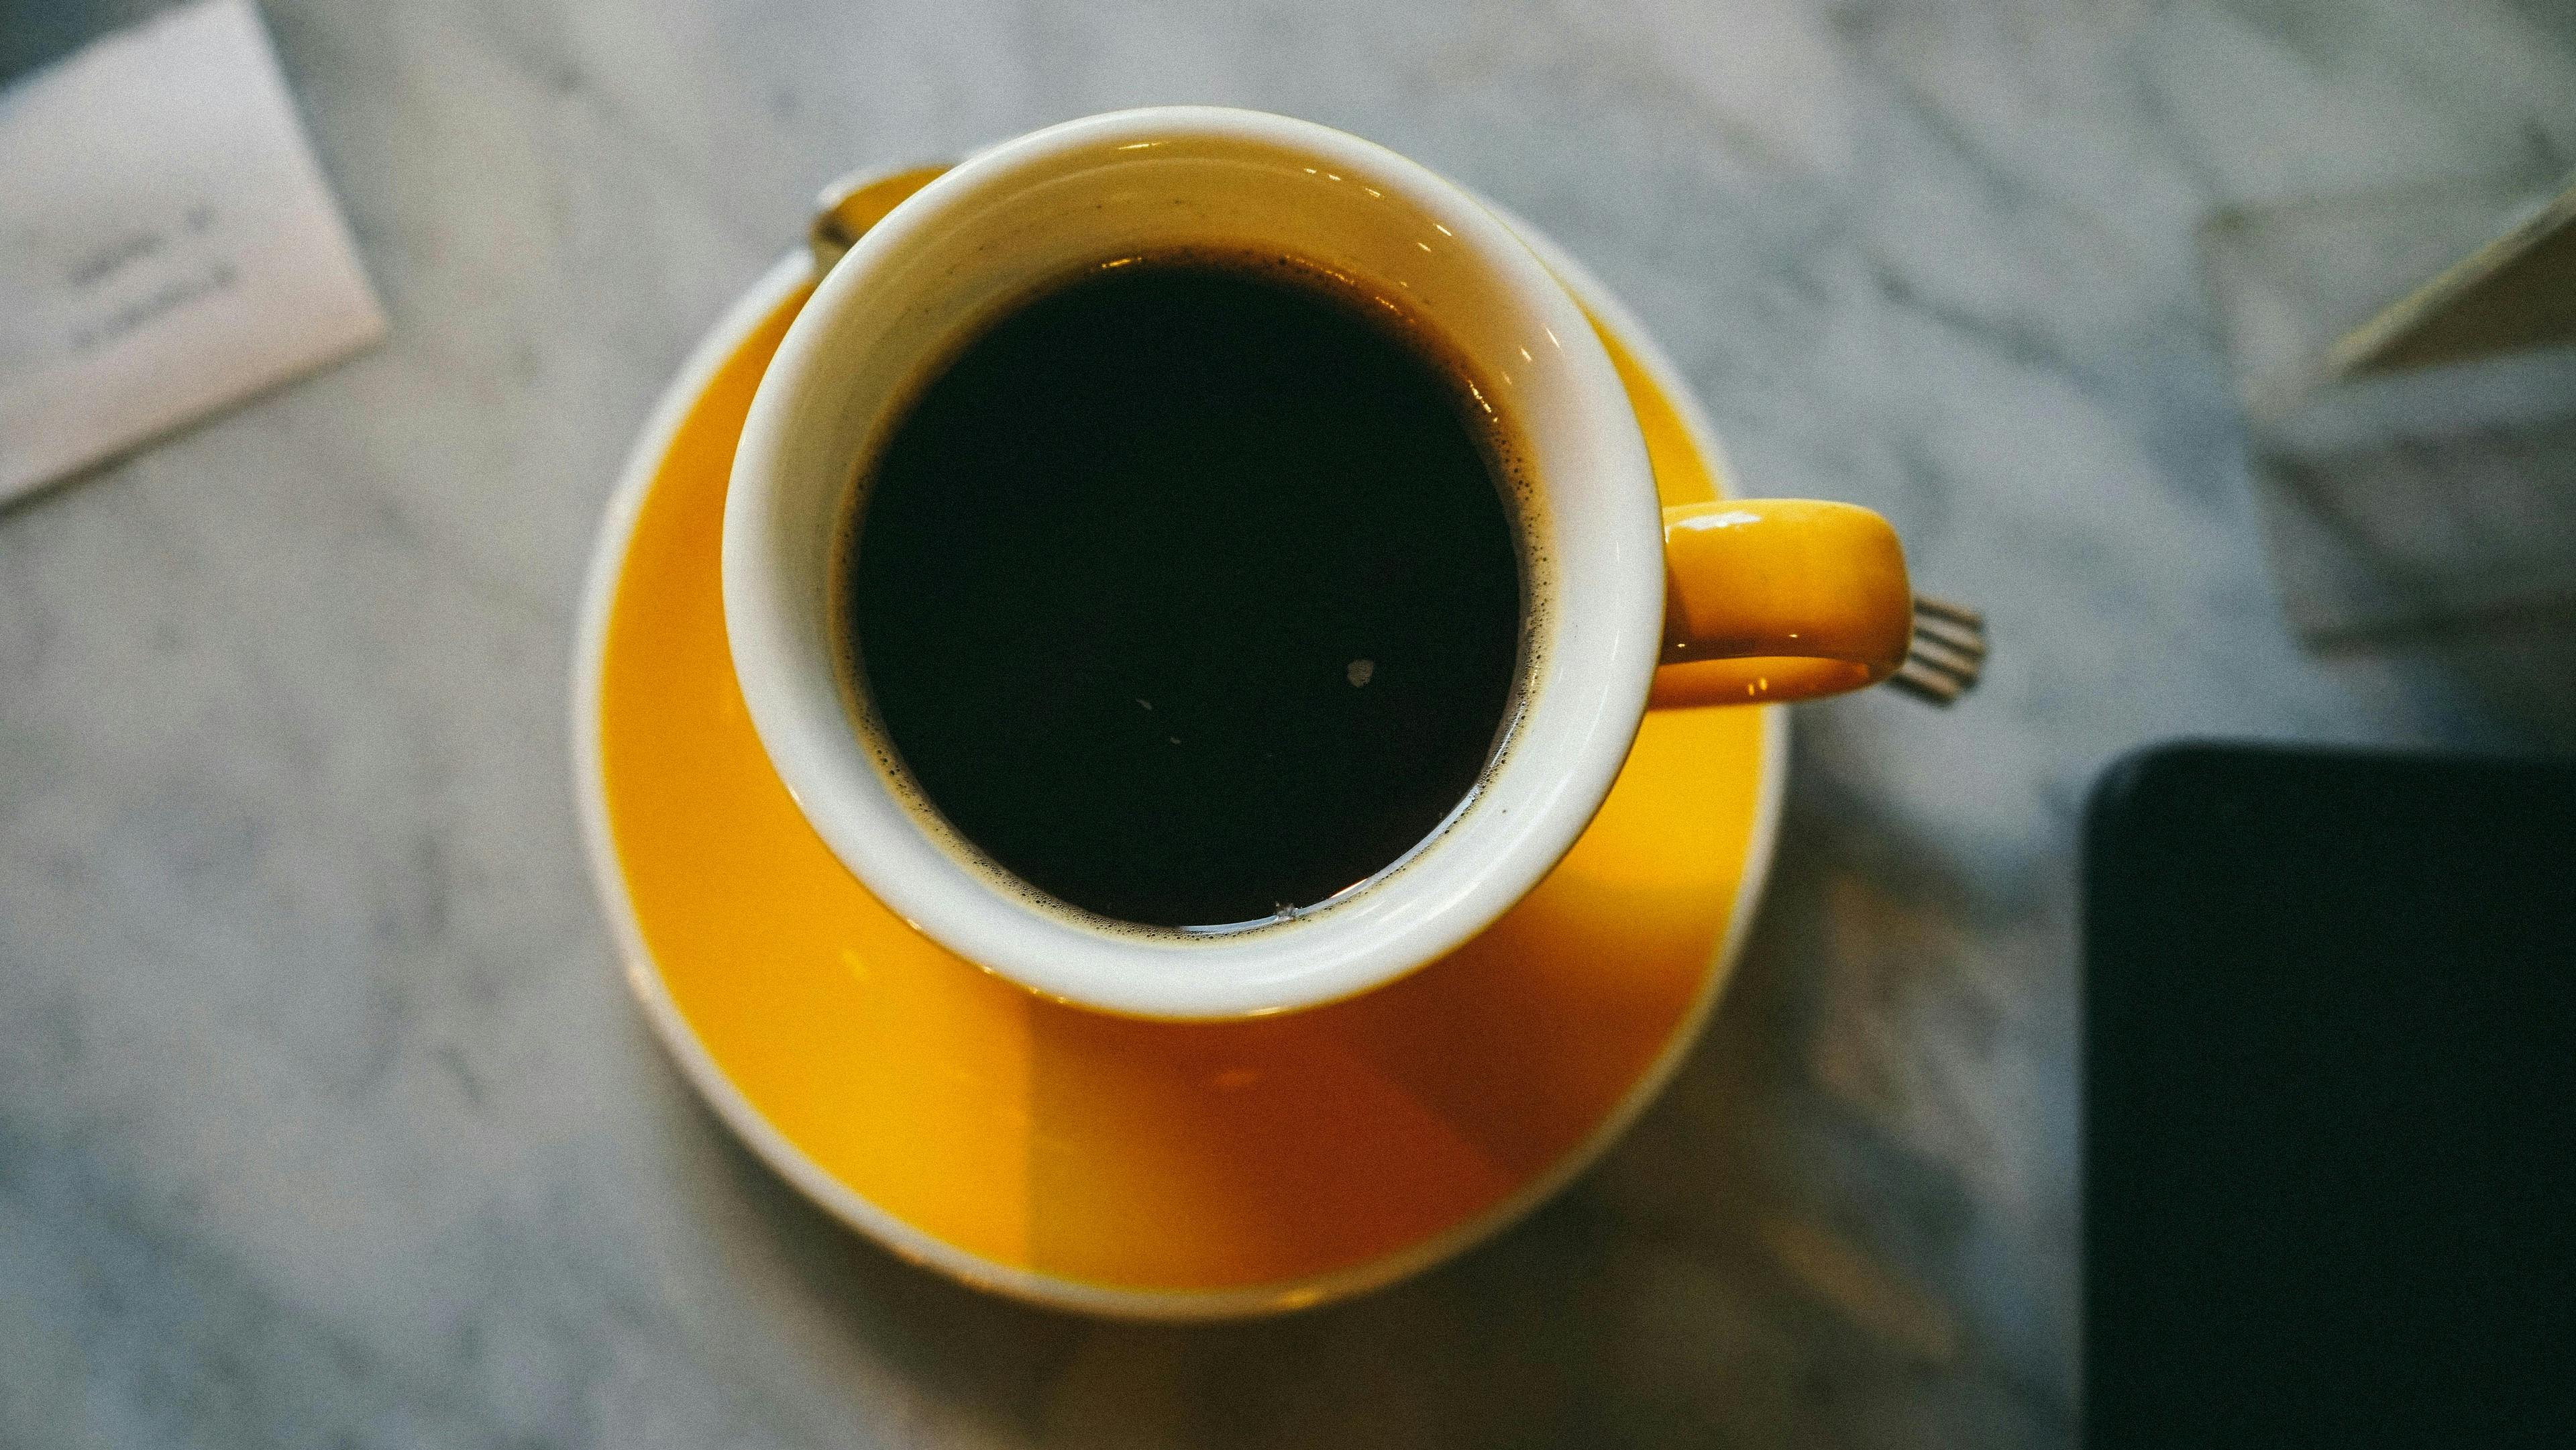 A yellow cup filled with black coffee sits on a matching saucer on a marble surface, with part of a piece of paper and device visible nearby.